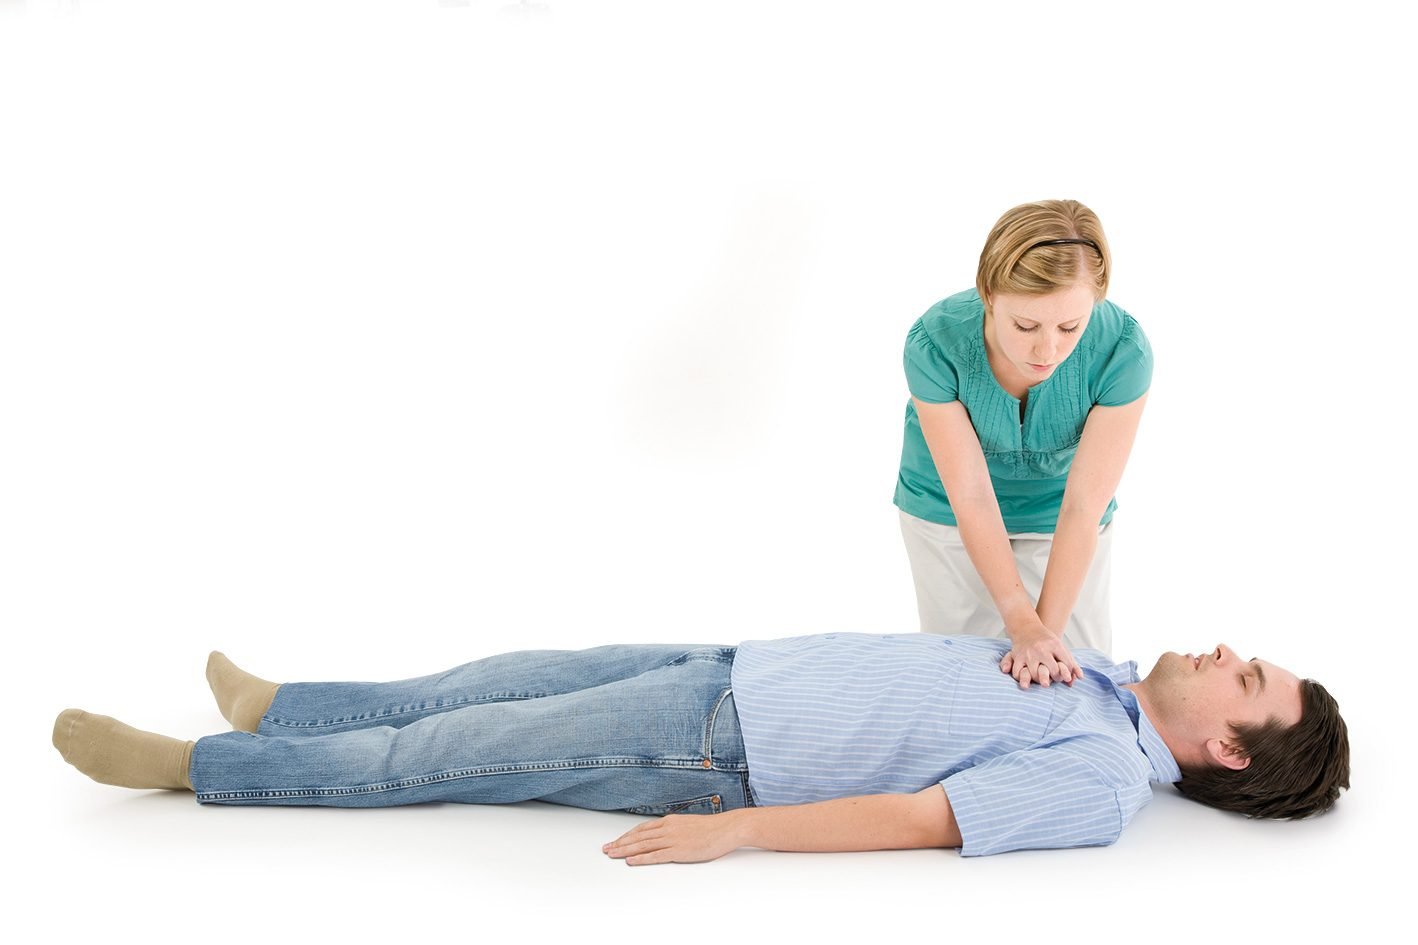 CPR Steps Everyone Should Know | Reader's Digest